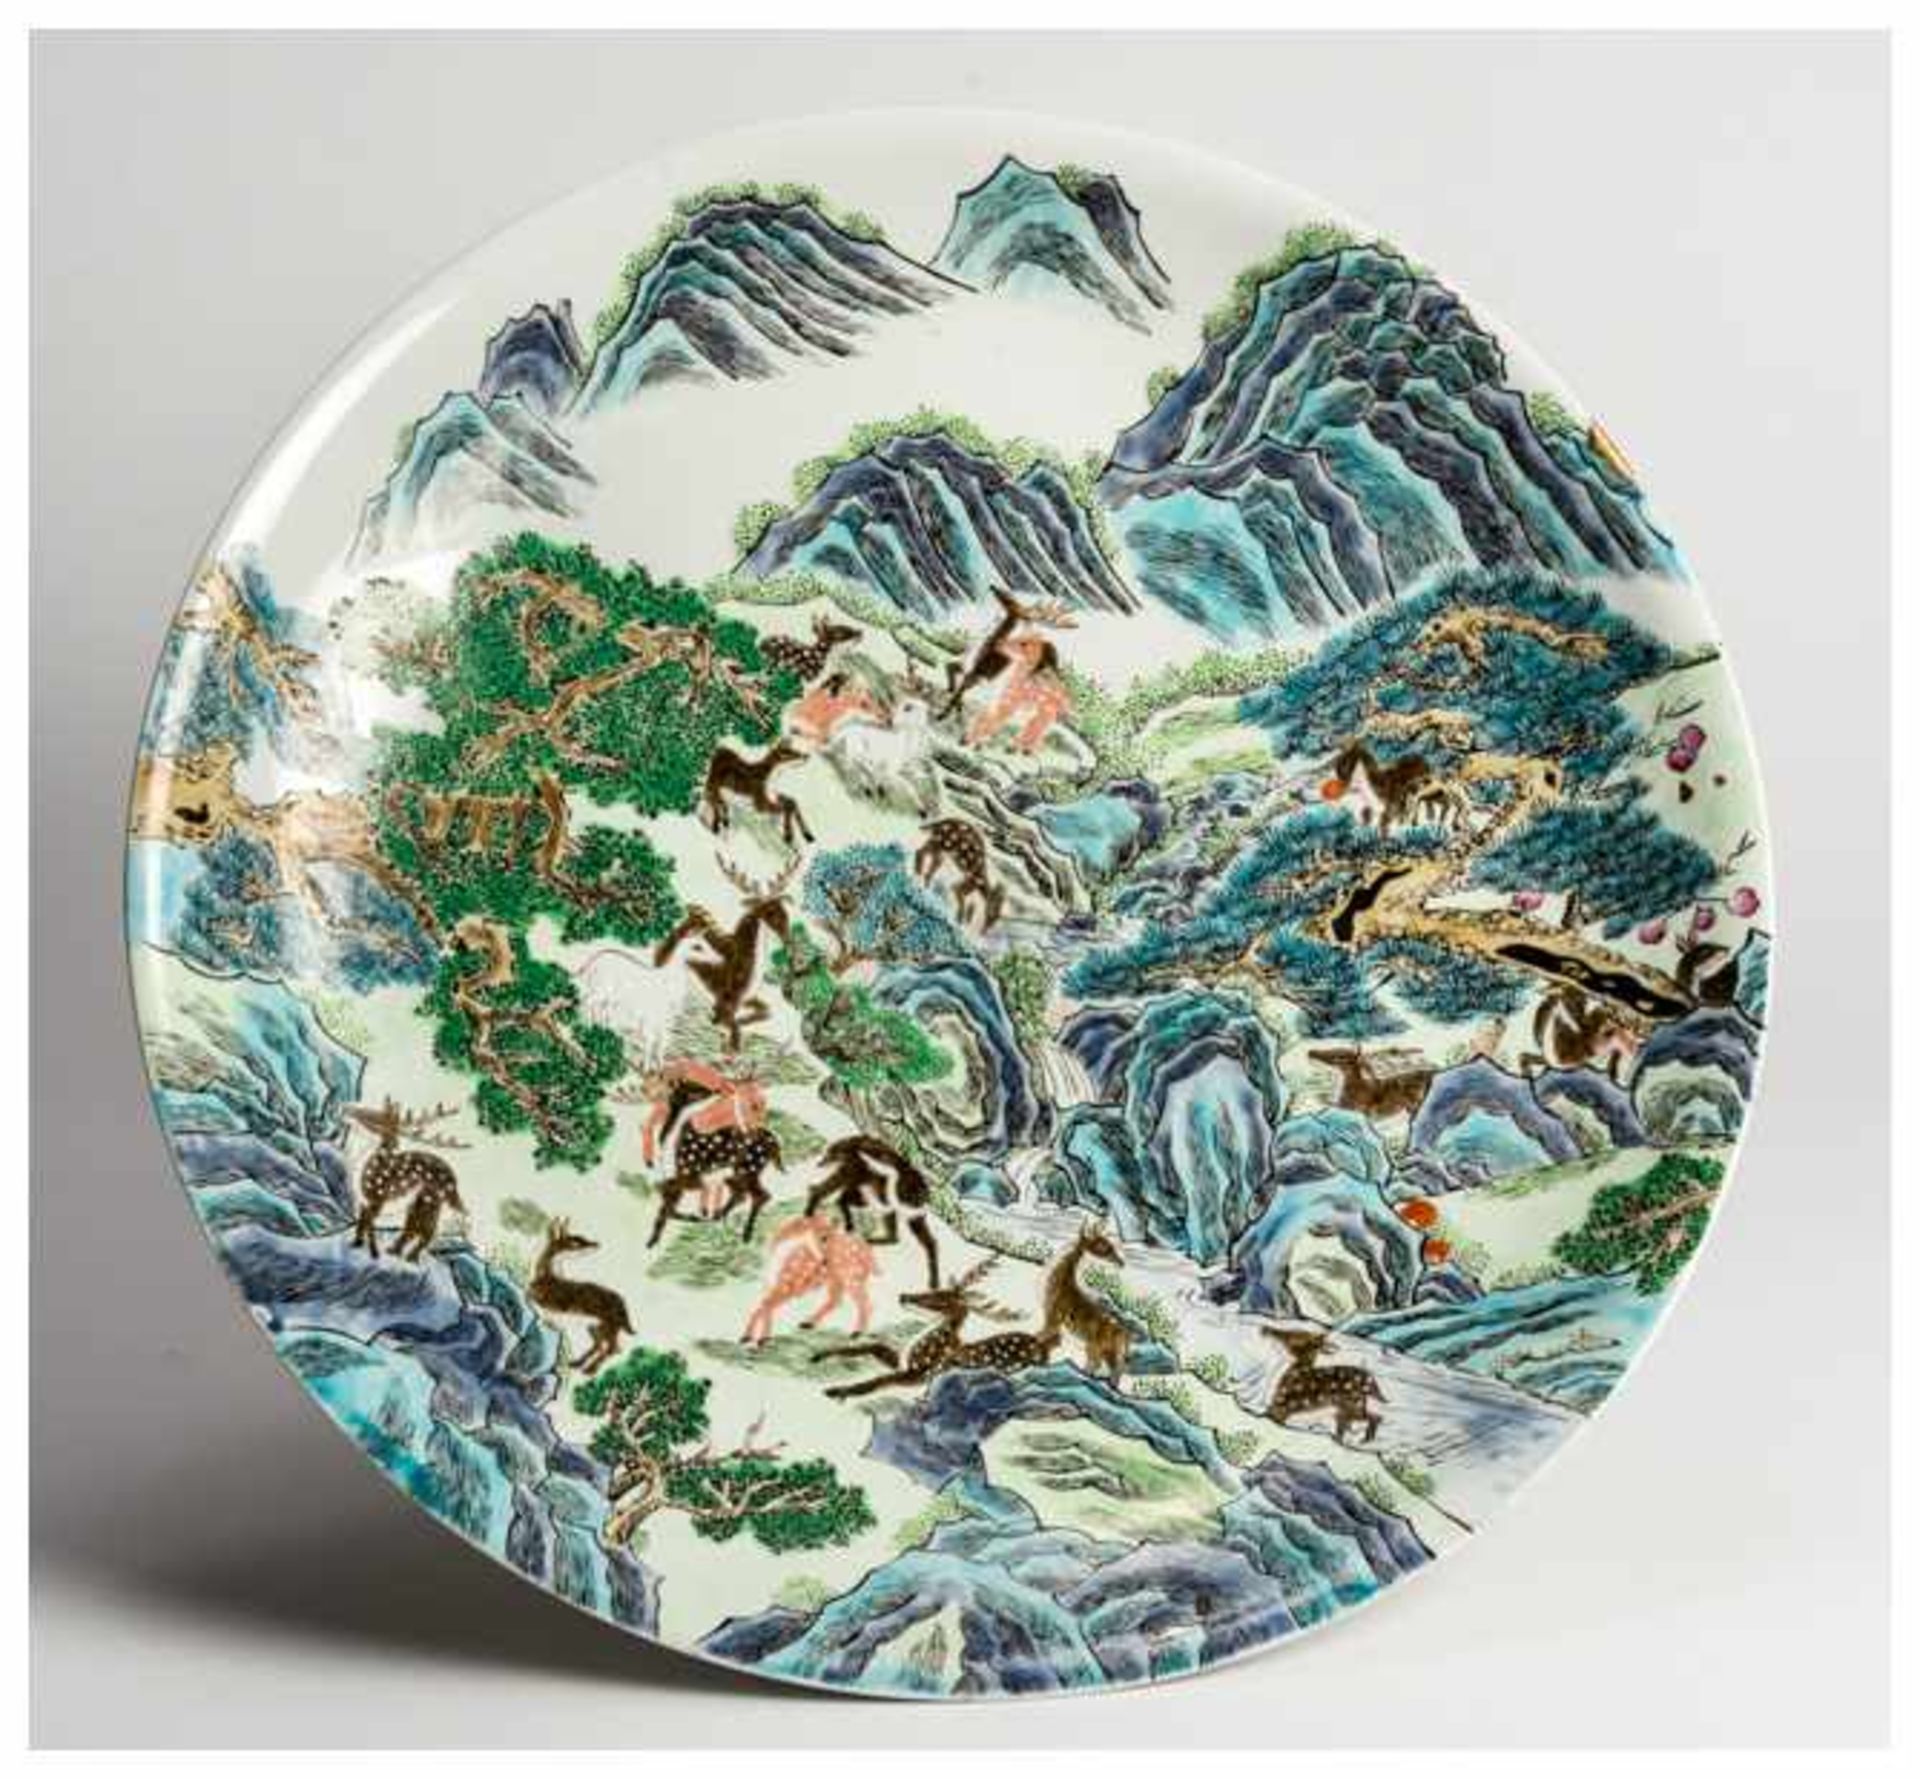 A LARGE DECORATIVE PLATE WITH 'HUNDRED DEER' MOTIF Porcelain with enamel painting. China, late